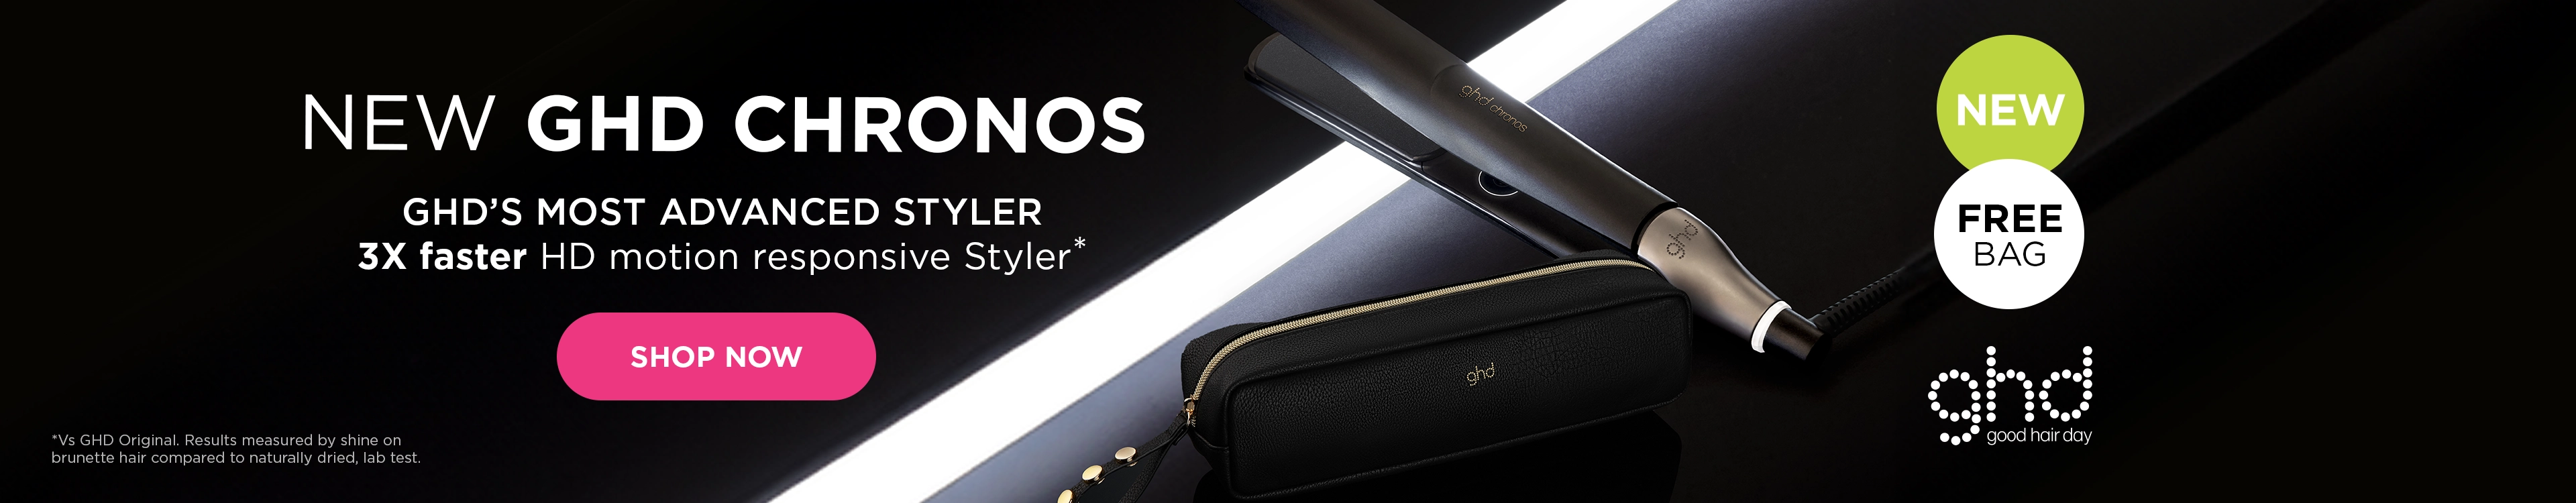 Enjoy 3x faster styling* with the new GHD Chronos Hair Styler